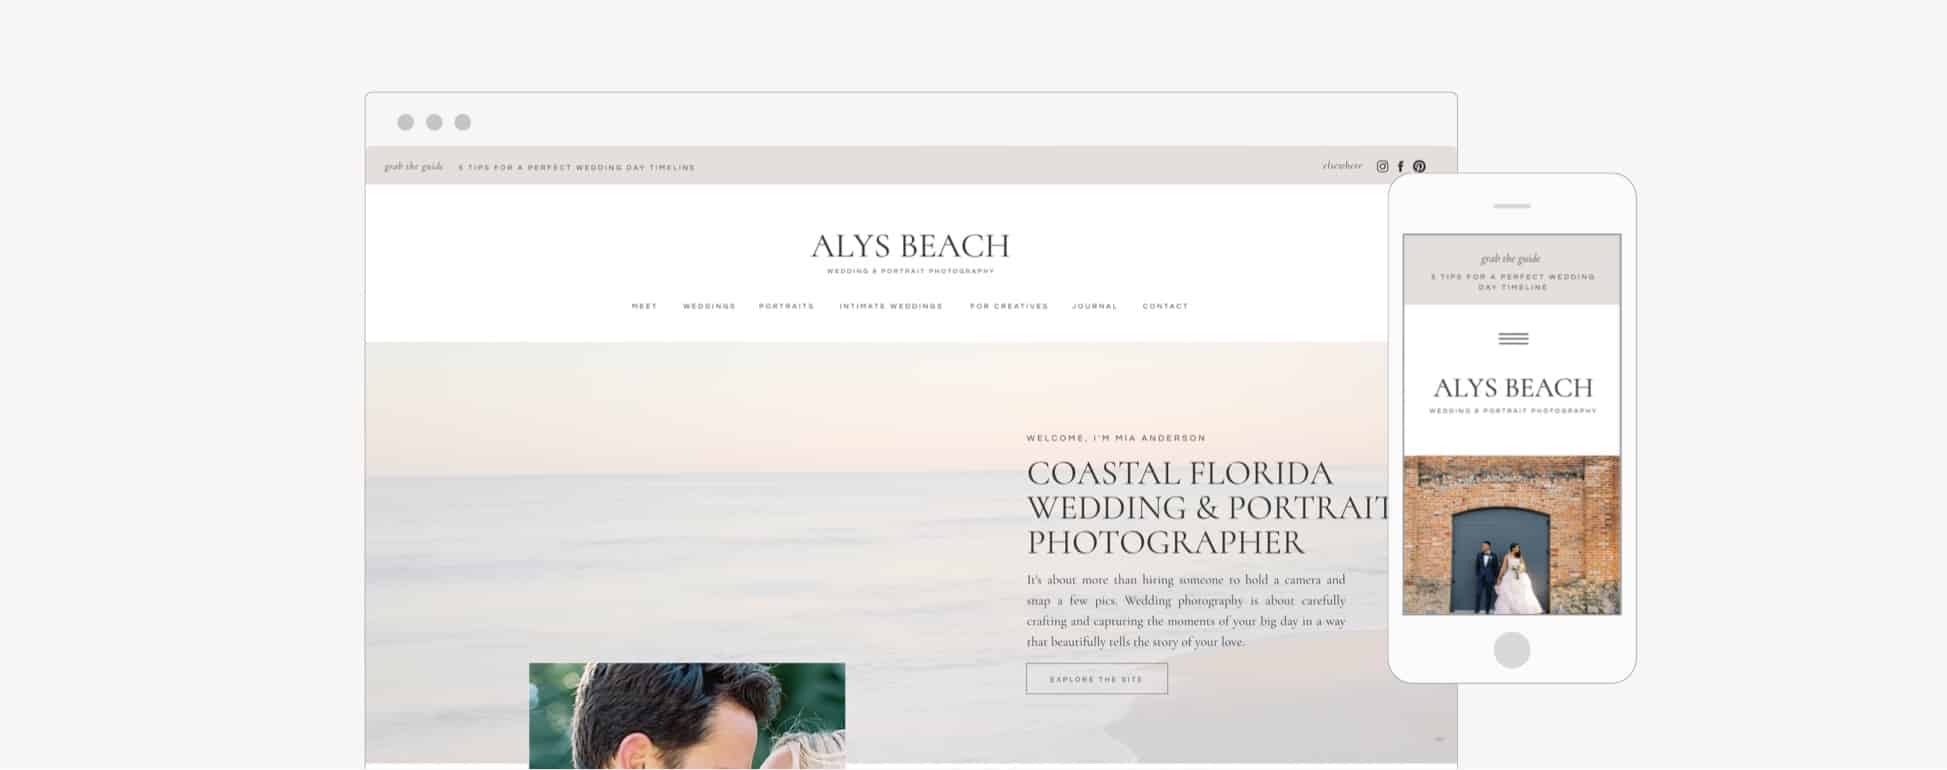 Easy to customize website templates for photographers + creatives | Showit | Davey & Krista